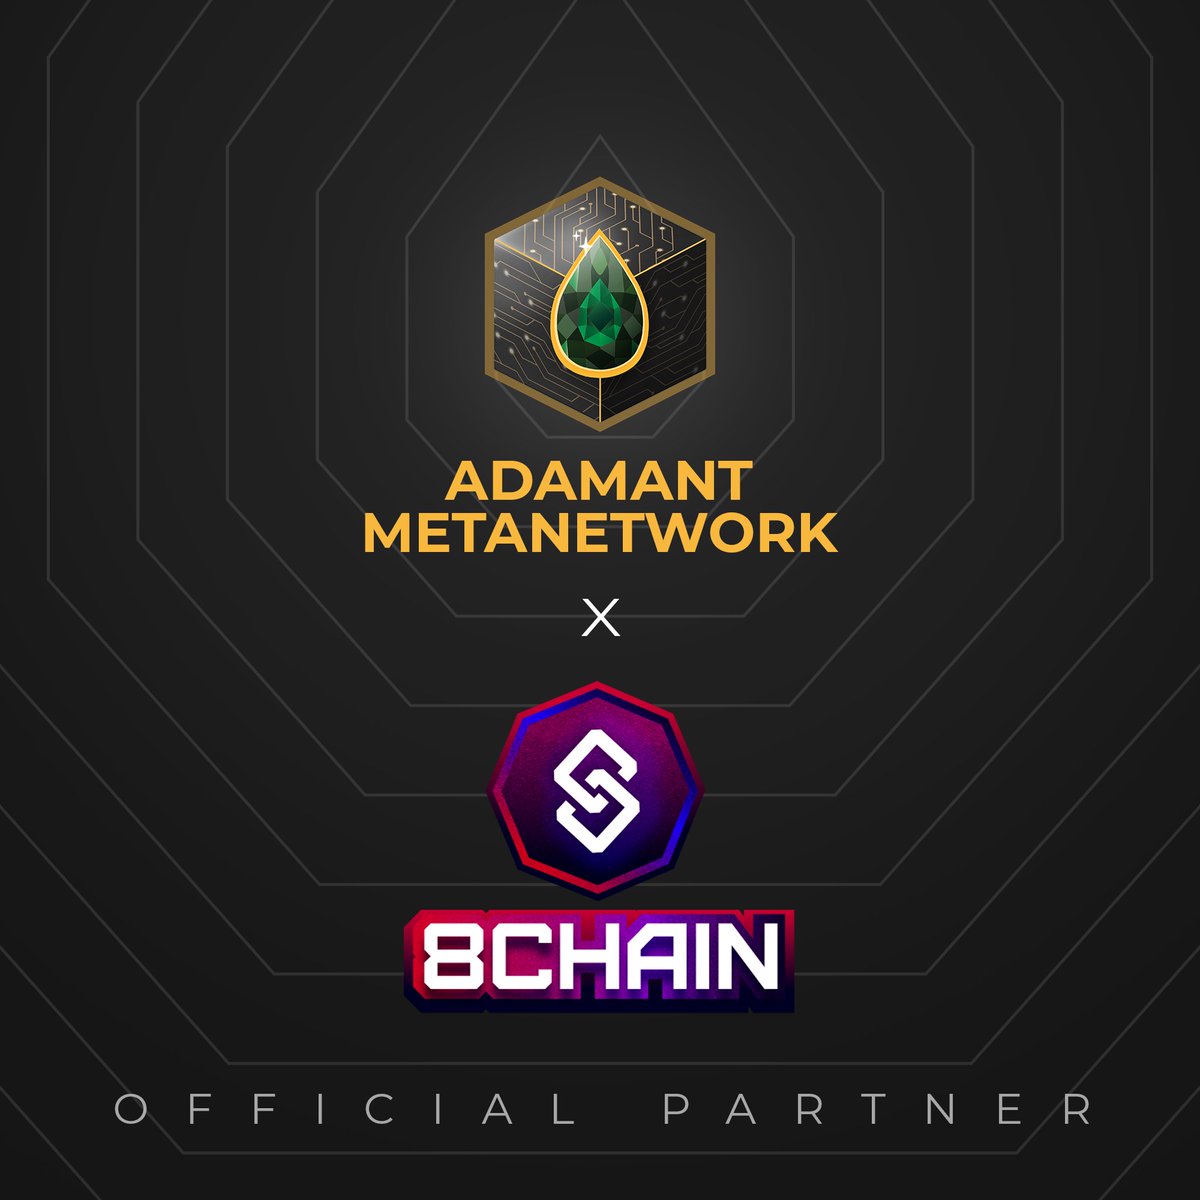 8 is our lucky number for today. Meet our new partner, 8CHAIN! ✨ 8CHAIN is an 8-in-1 token project that is building one chain at a time. One of the chains they are currently working on gives you rewards as you stay healthy and fit! @The8CHAIN